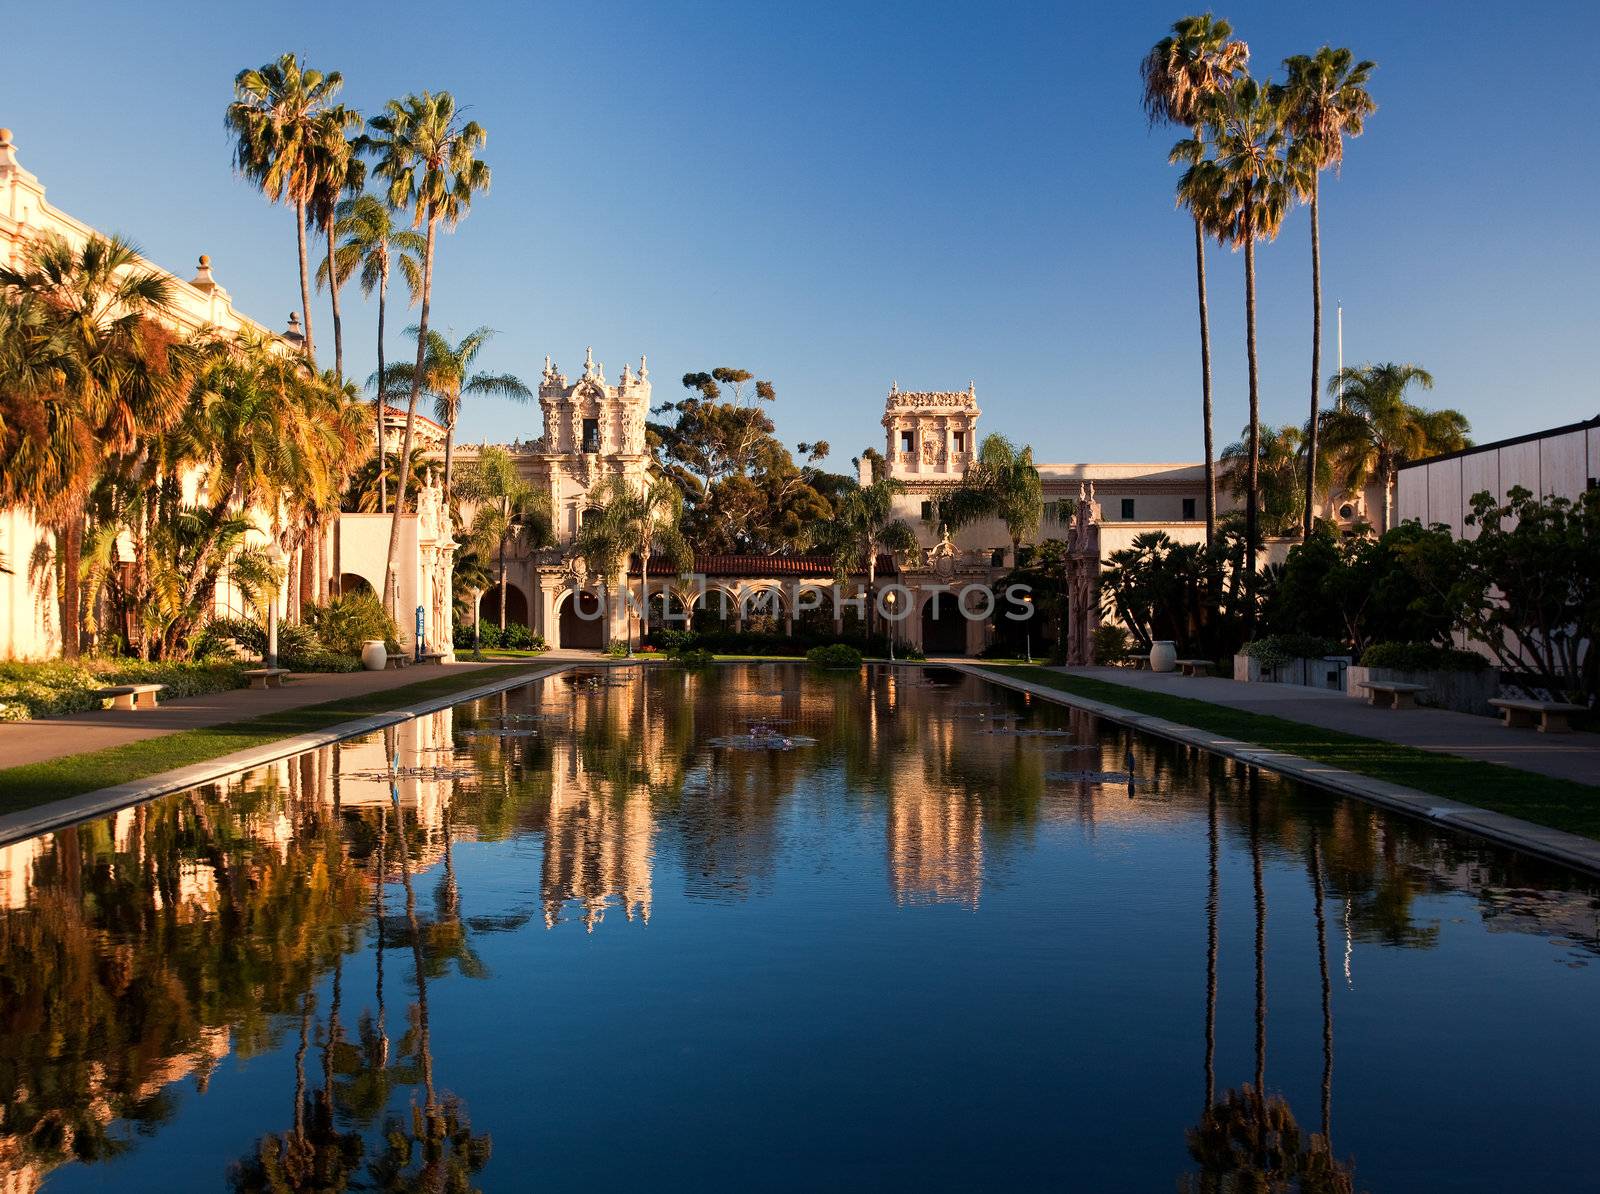 Casa de Balboa and House of Hospitality at sunset by steheap